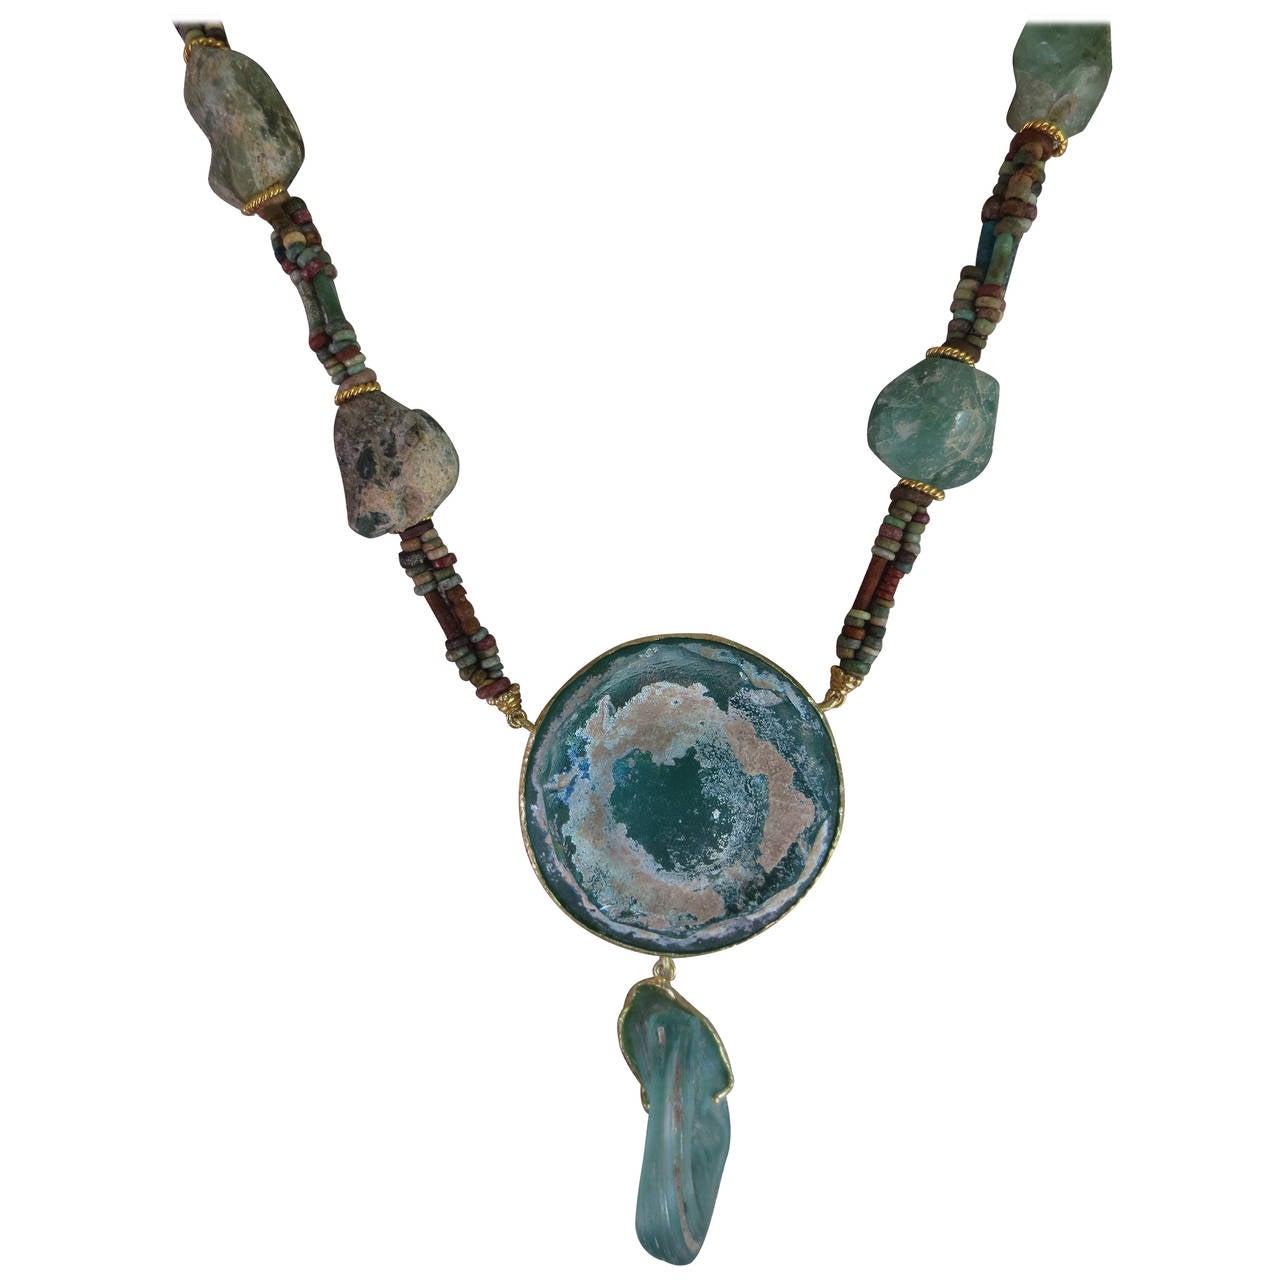 Authentic Ancient Roman Glass beads and "Hyksos" faience Bead Necklace